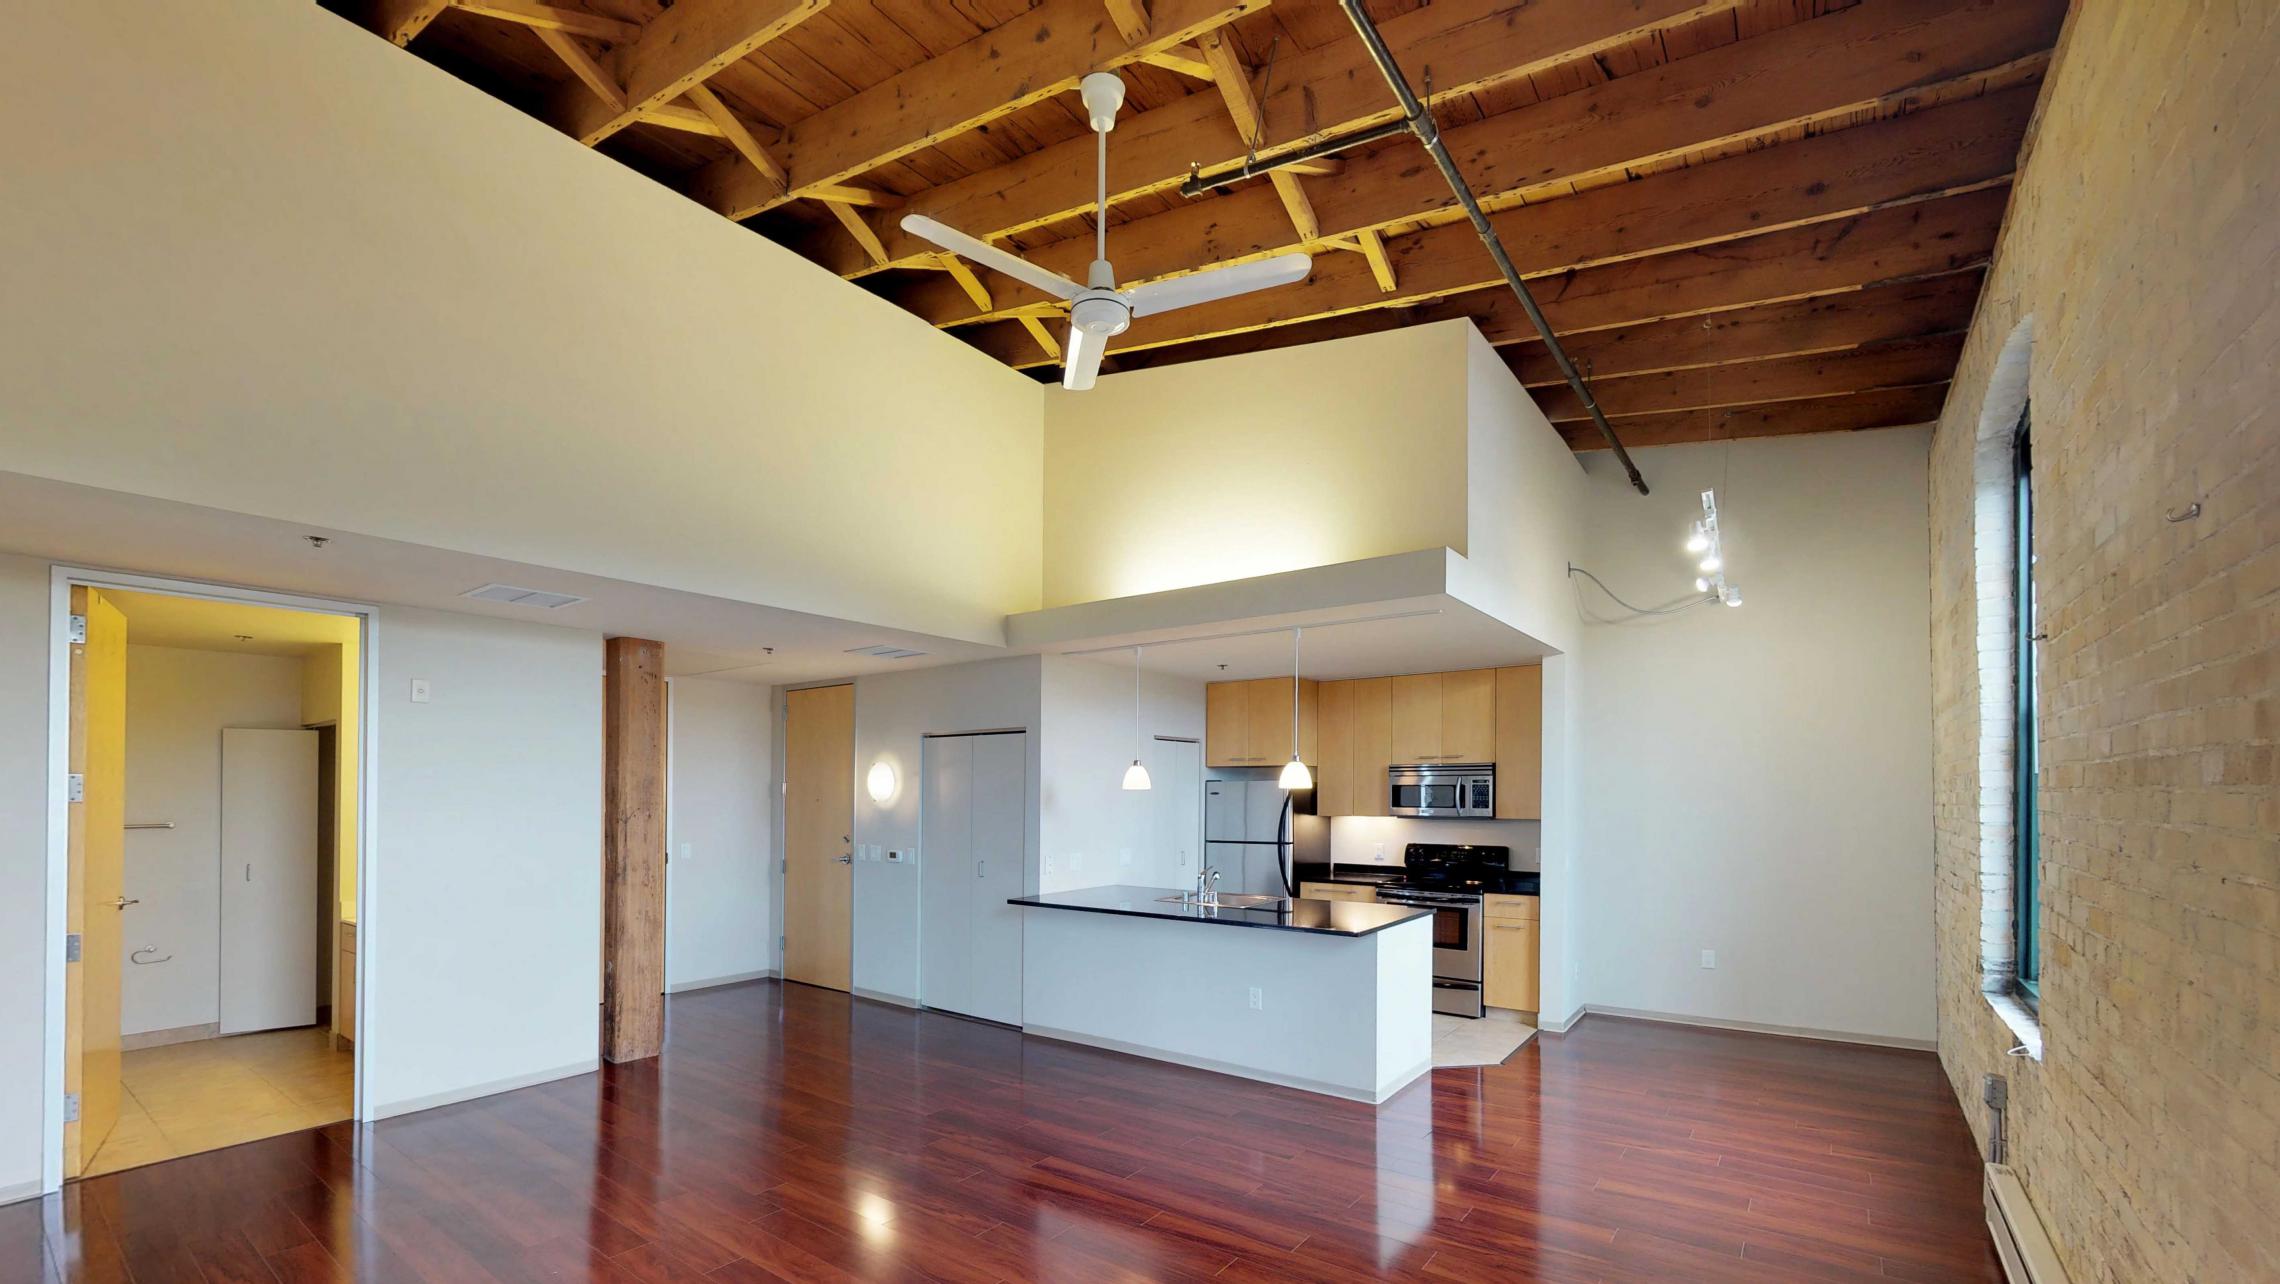 Tobacco-Lofts-Two-Bedroom-Apartment-E312-Historic-Downtown-Madison-Living-Room-Kitchen-Design-Yards.jpg